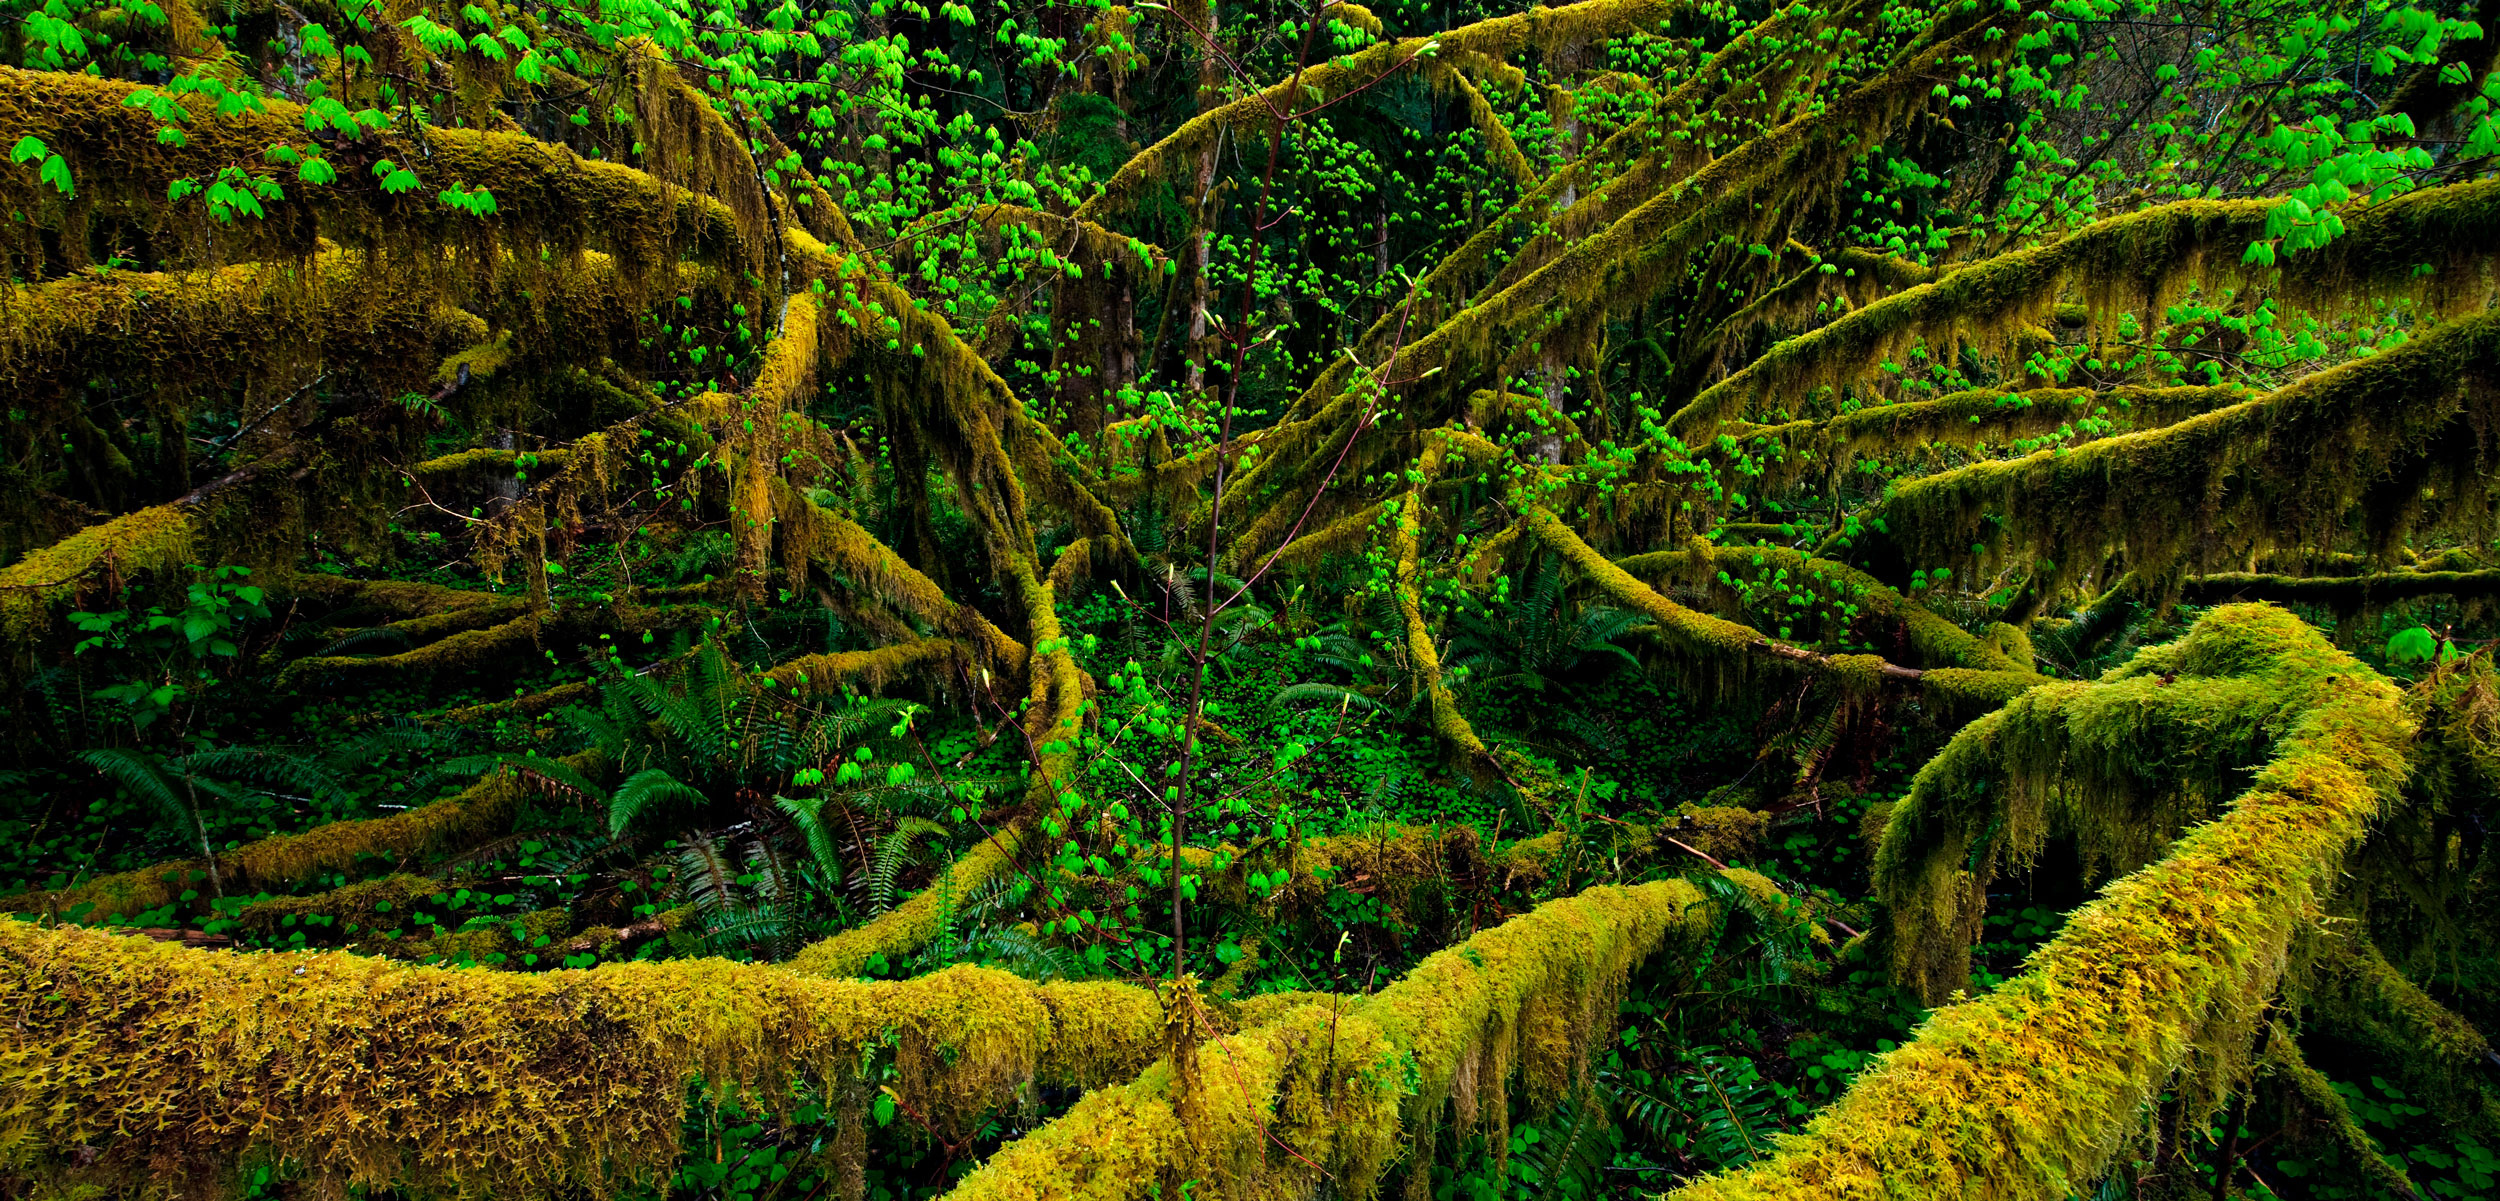 Moss-covered Vine maples in the Hoh River Rainforest